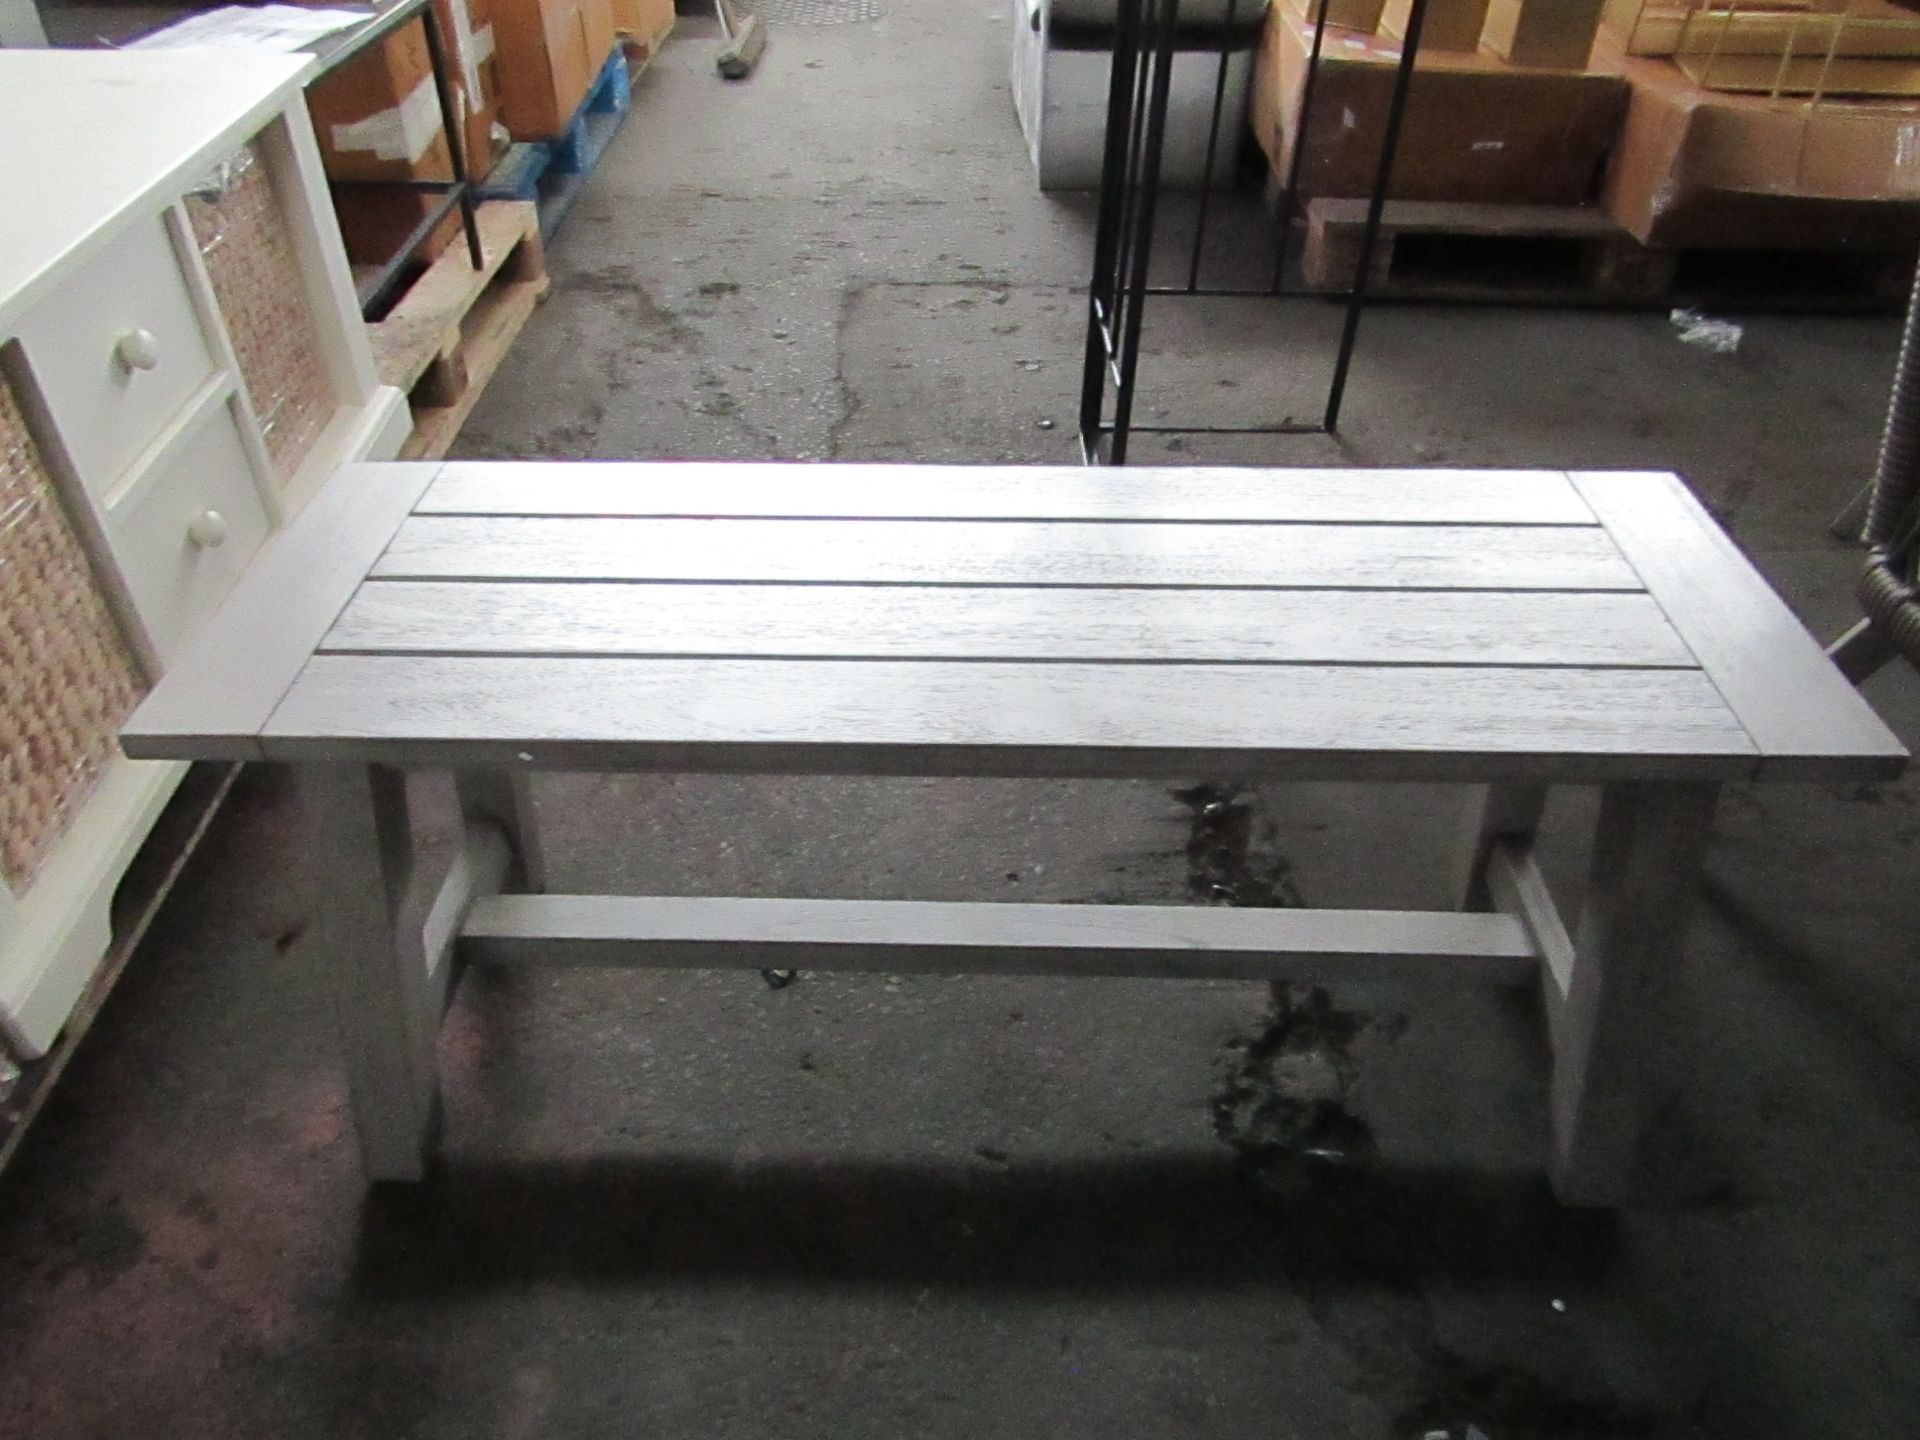 Cotswold Company Baunton Trestle bench RRP Â£175.00 - This item looks to be in good condition and